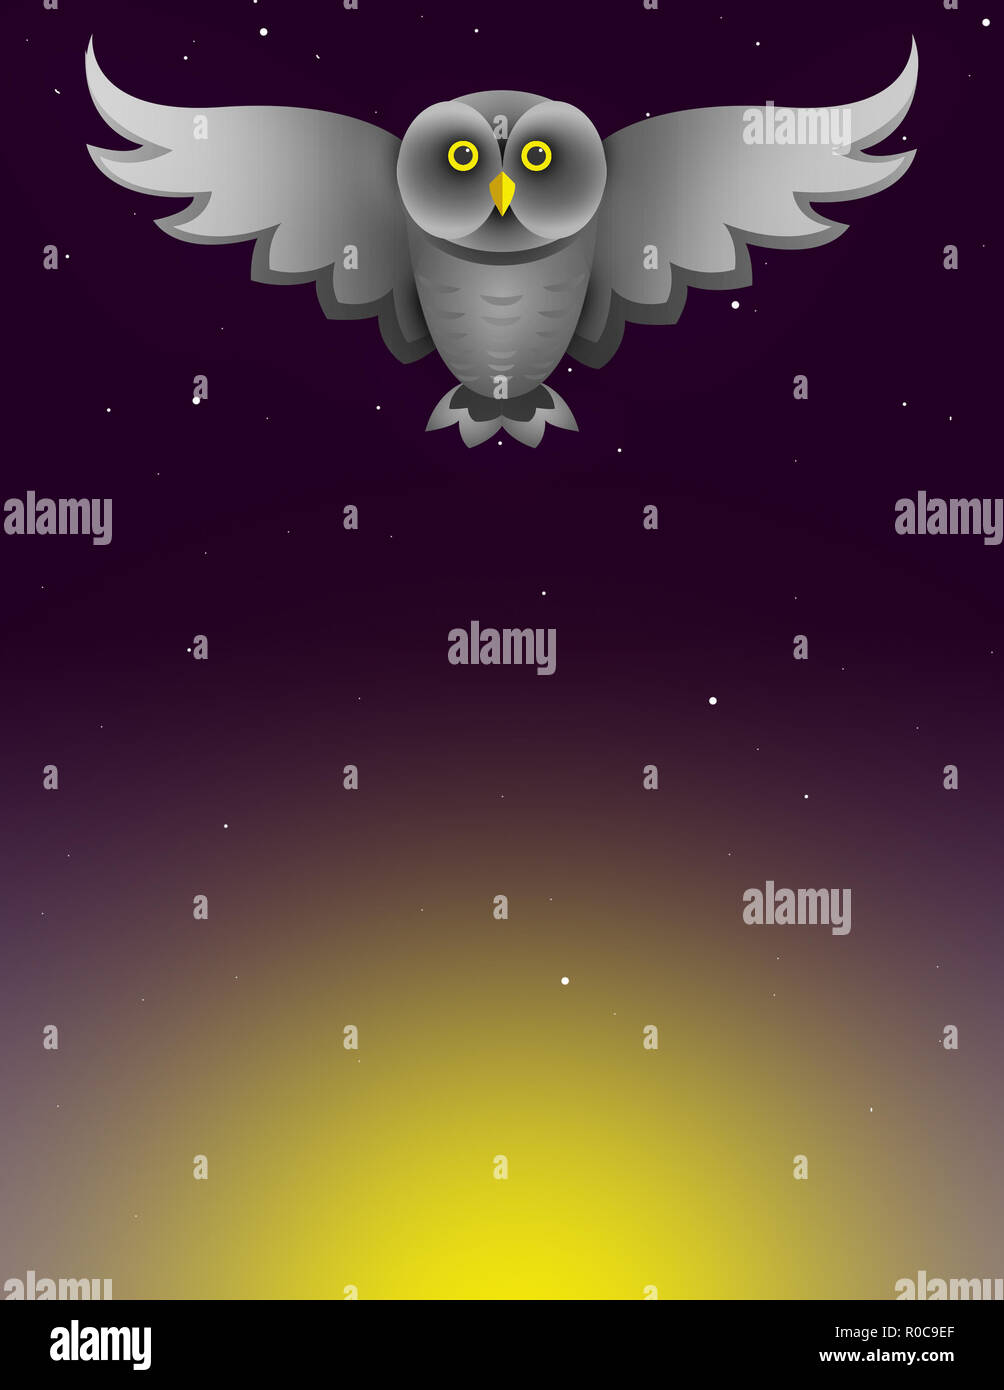 Illustration of a gray owl flying against a purple night sky Stock Photo